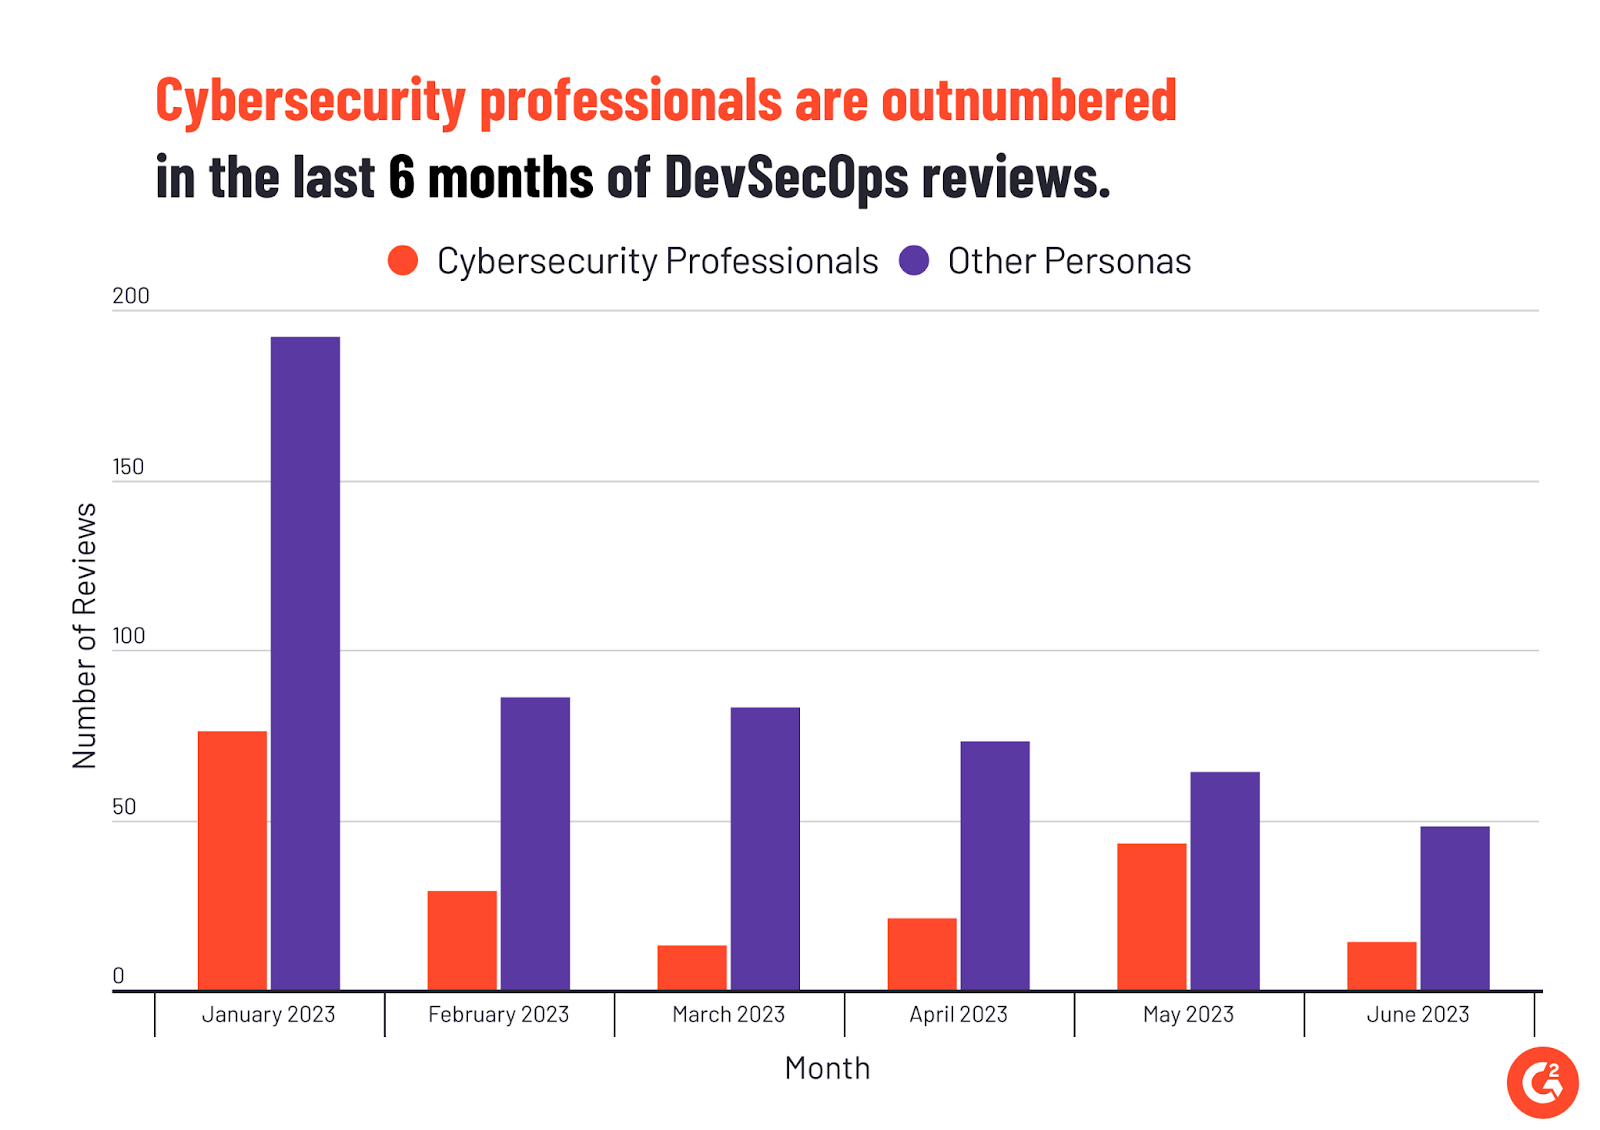 A bar graph highlighting the disparity in number of DevSecOps reviews by cybersecurity professionals and others.